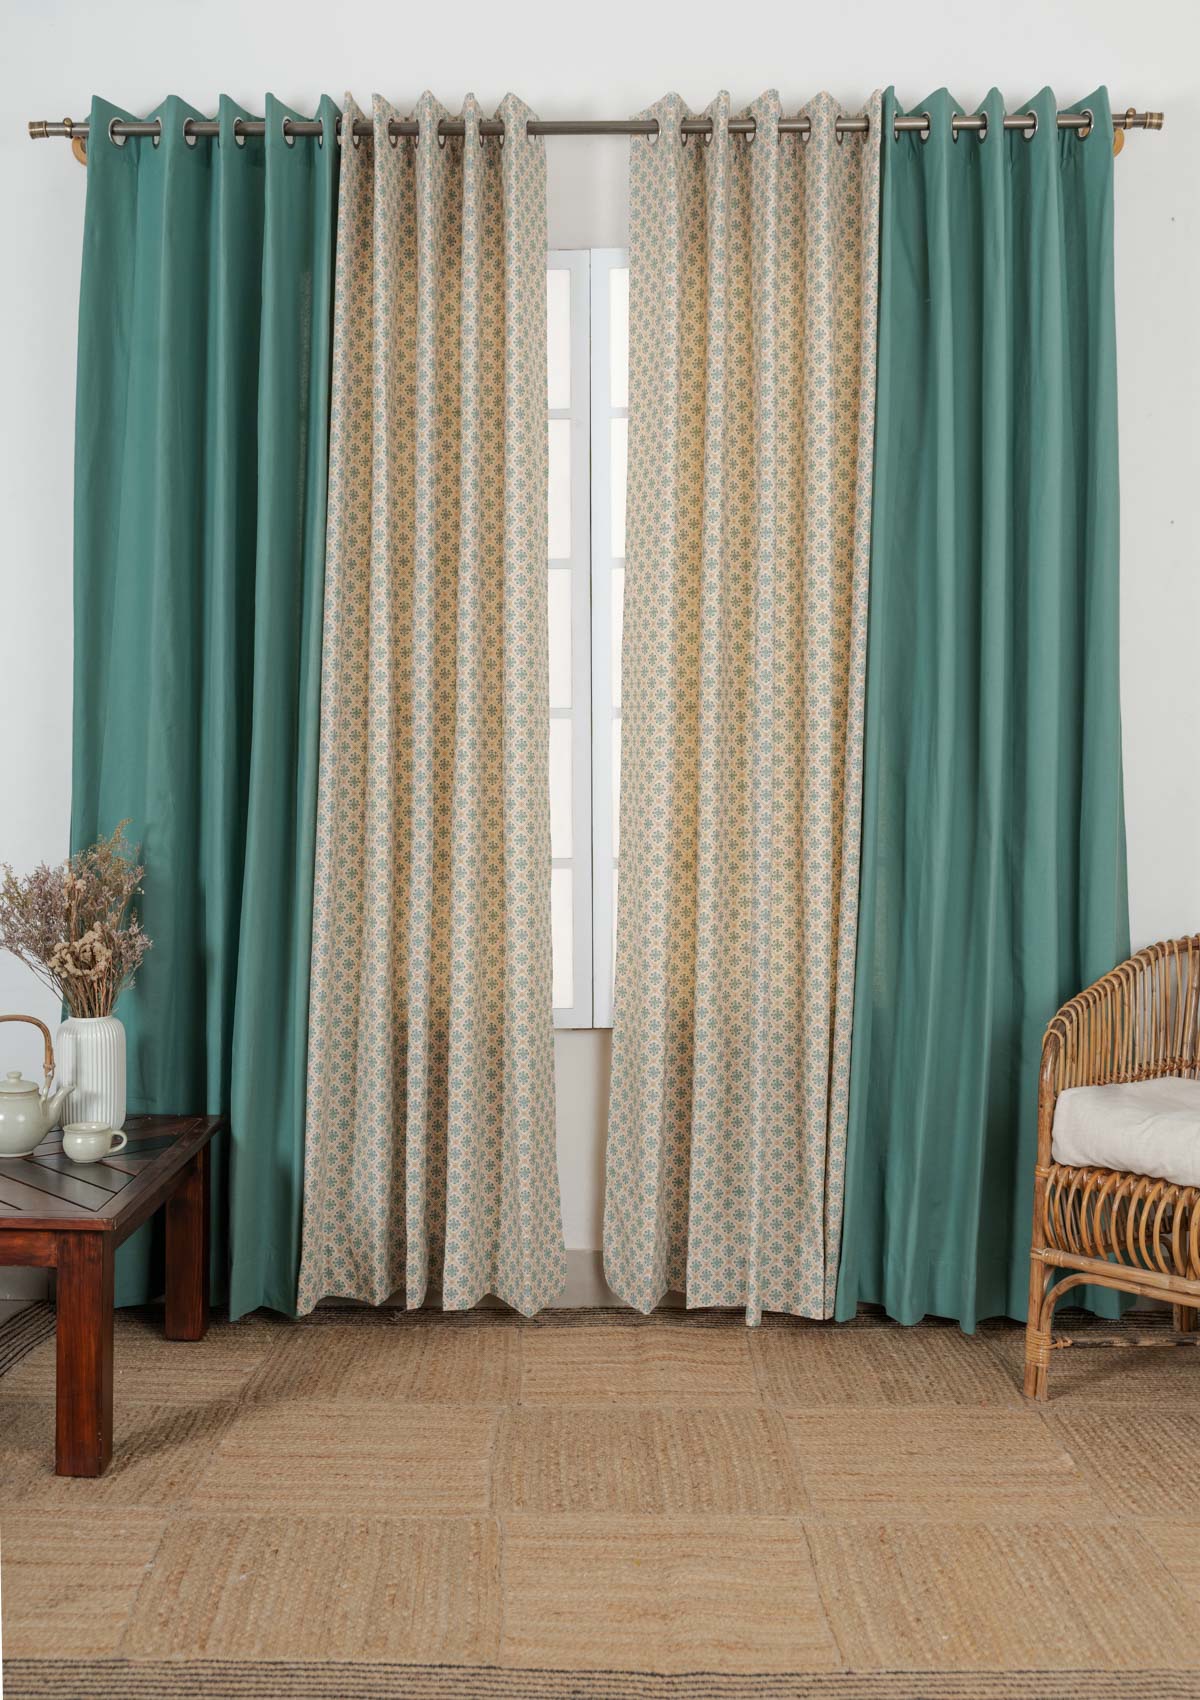 Solid Aqua blue cotton curtain with Yura geometric 100% cotton curtains for living room - Set of 4